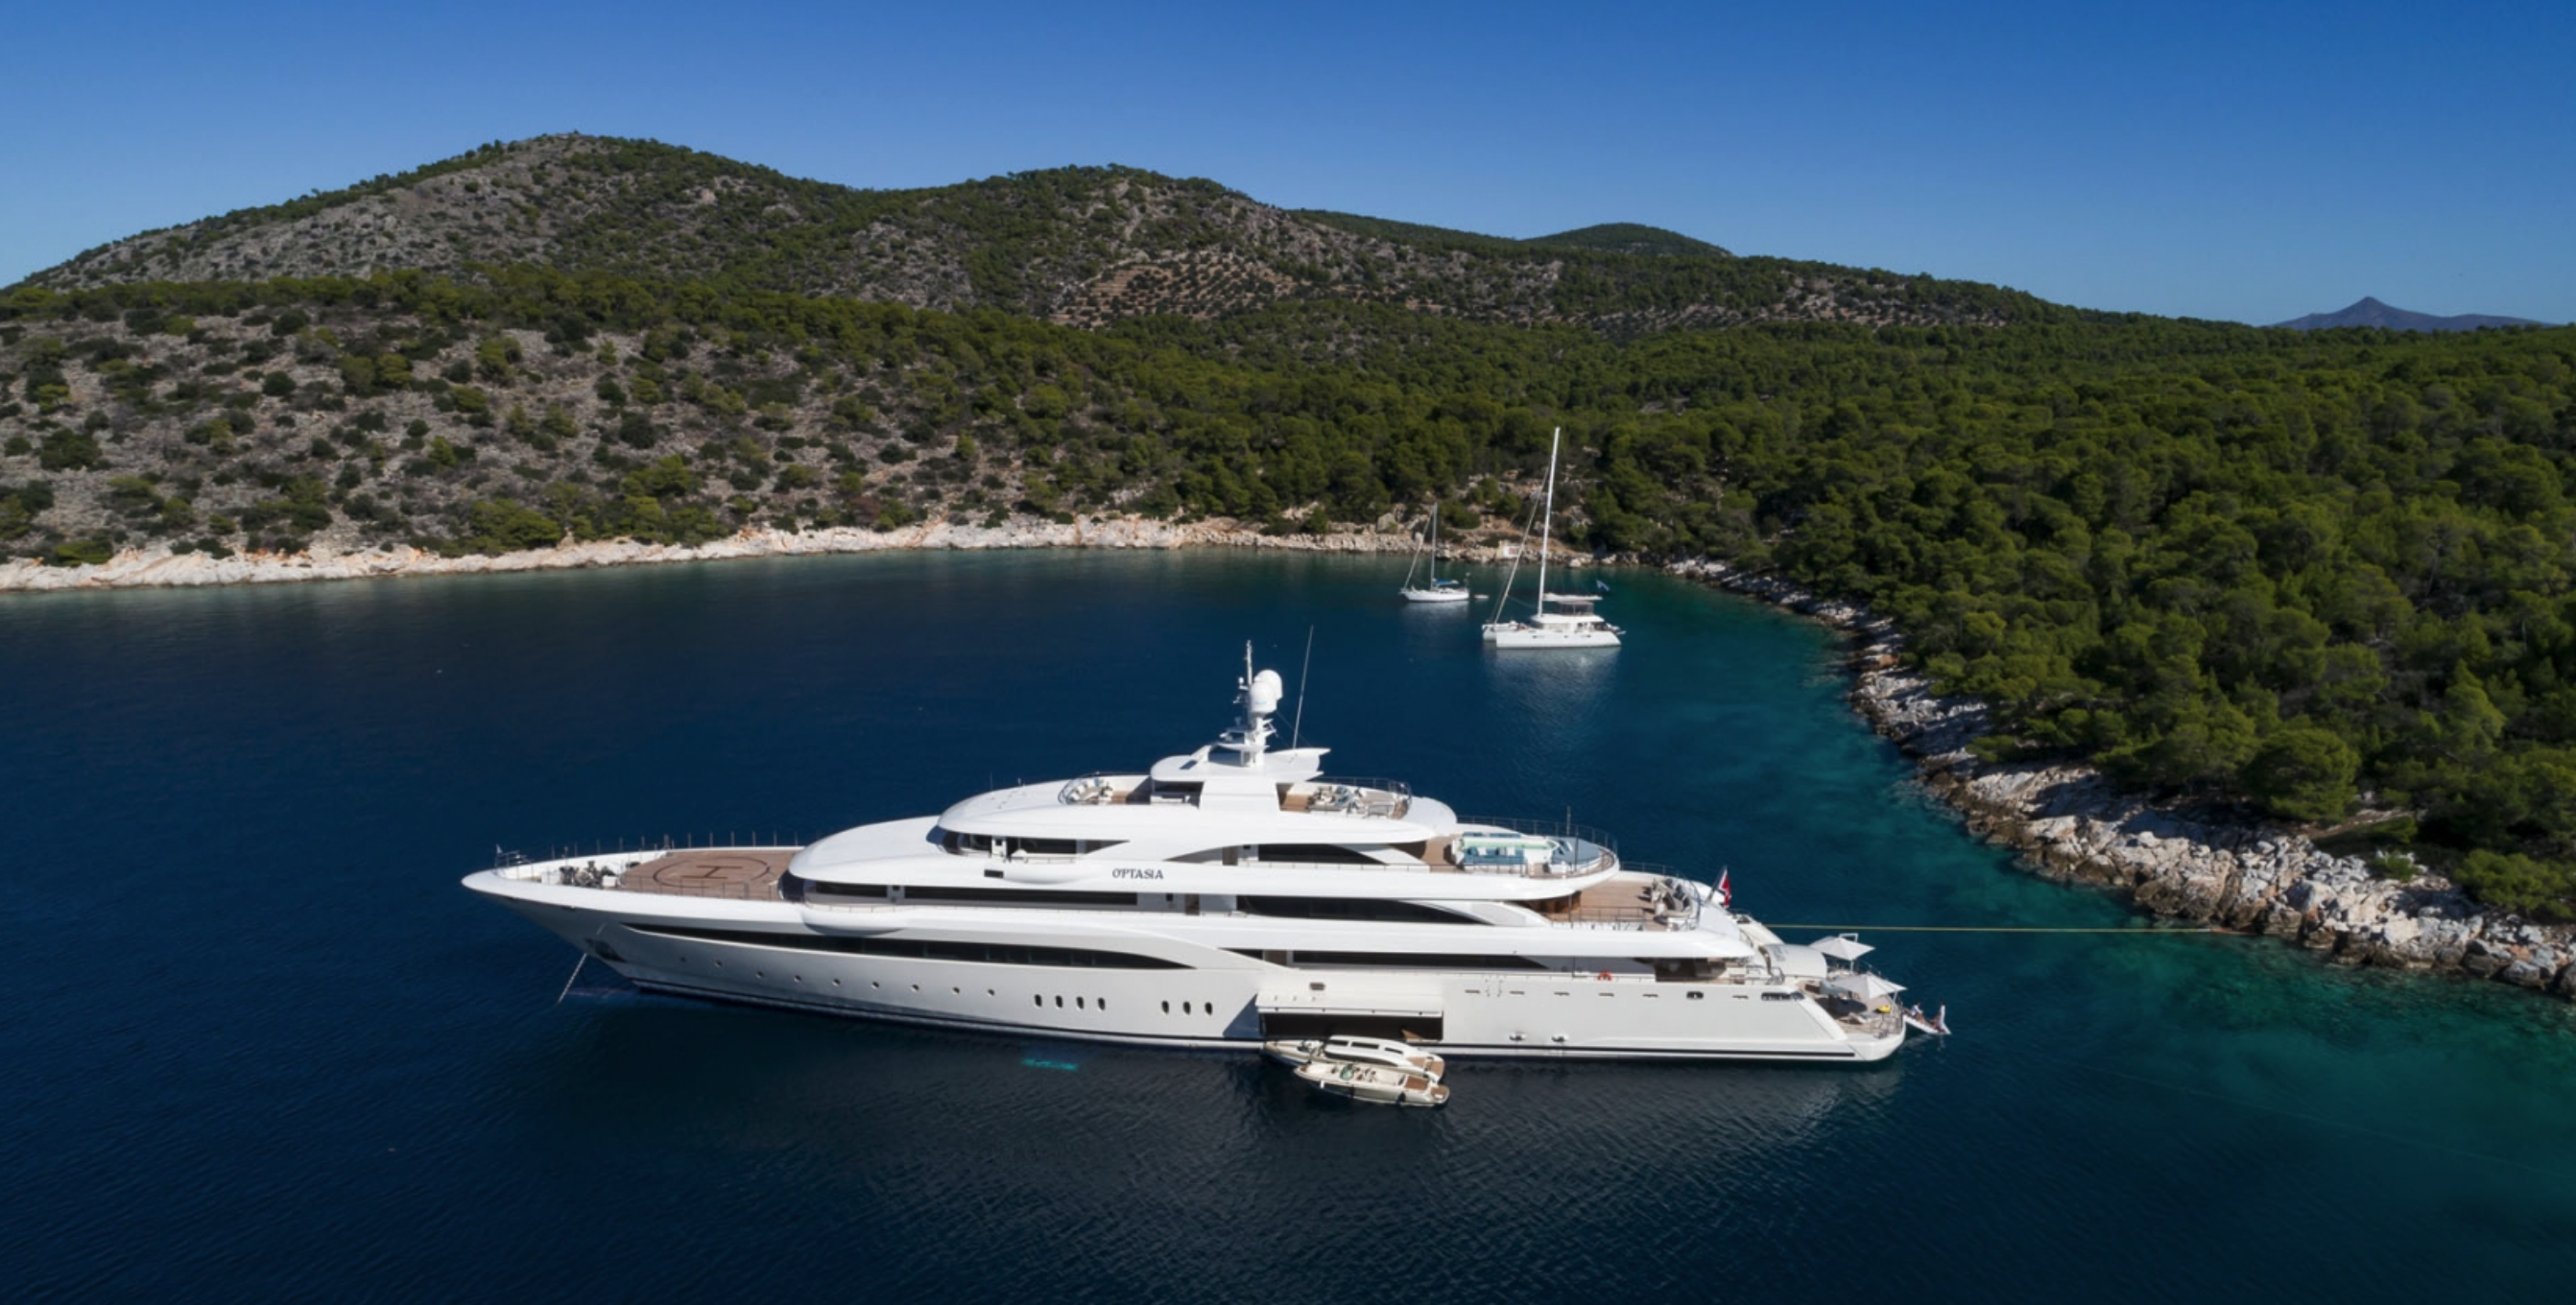 O’Ptasia - Yacht Charter Neos Marmaras & Boat hire in East Mediterranean 1